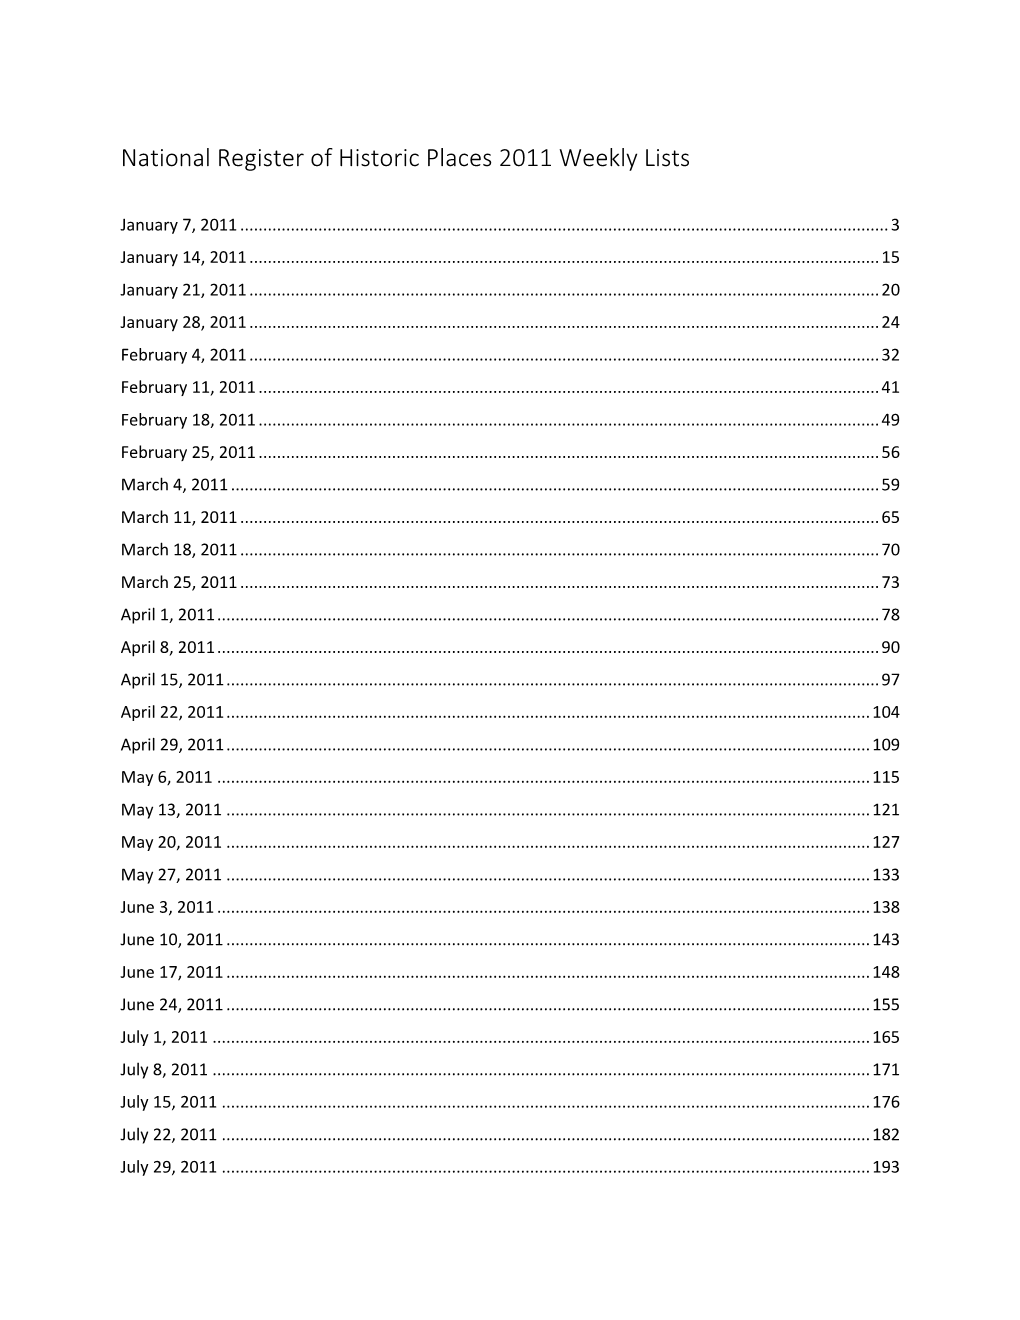 National Register of Historic Places Weekly Lists for 2011